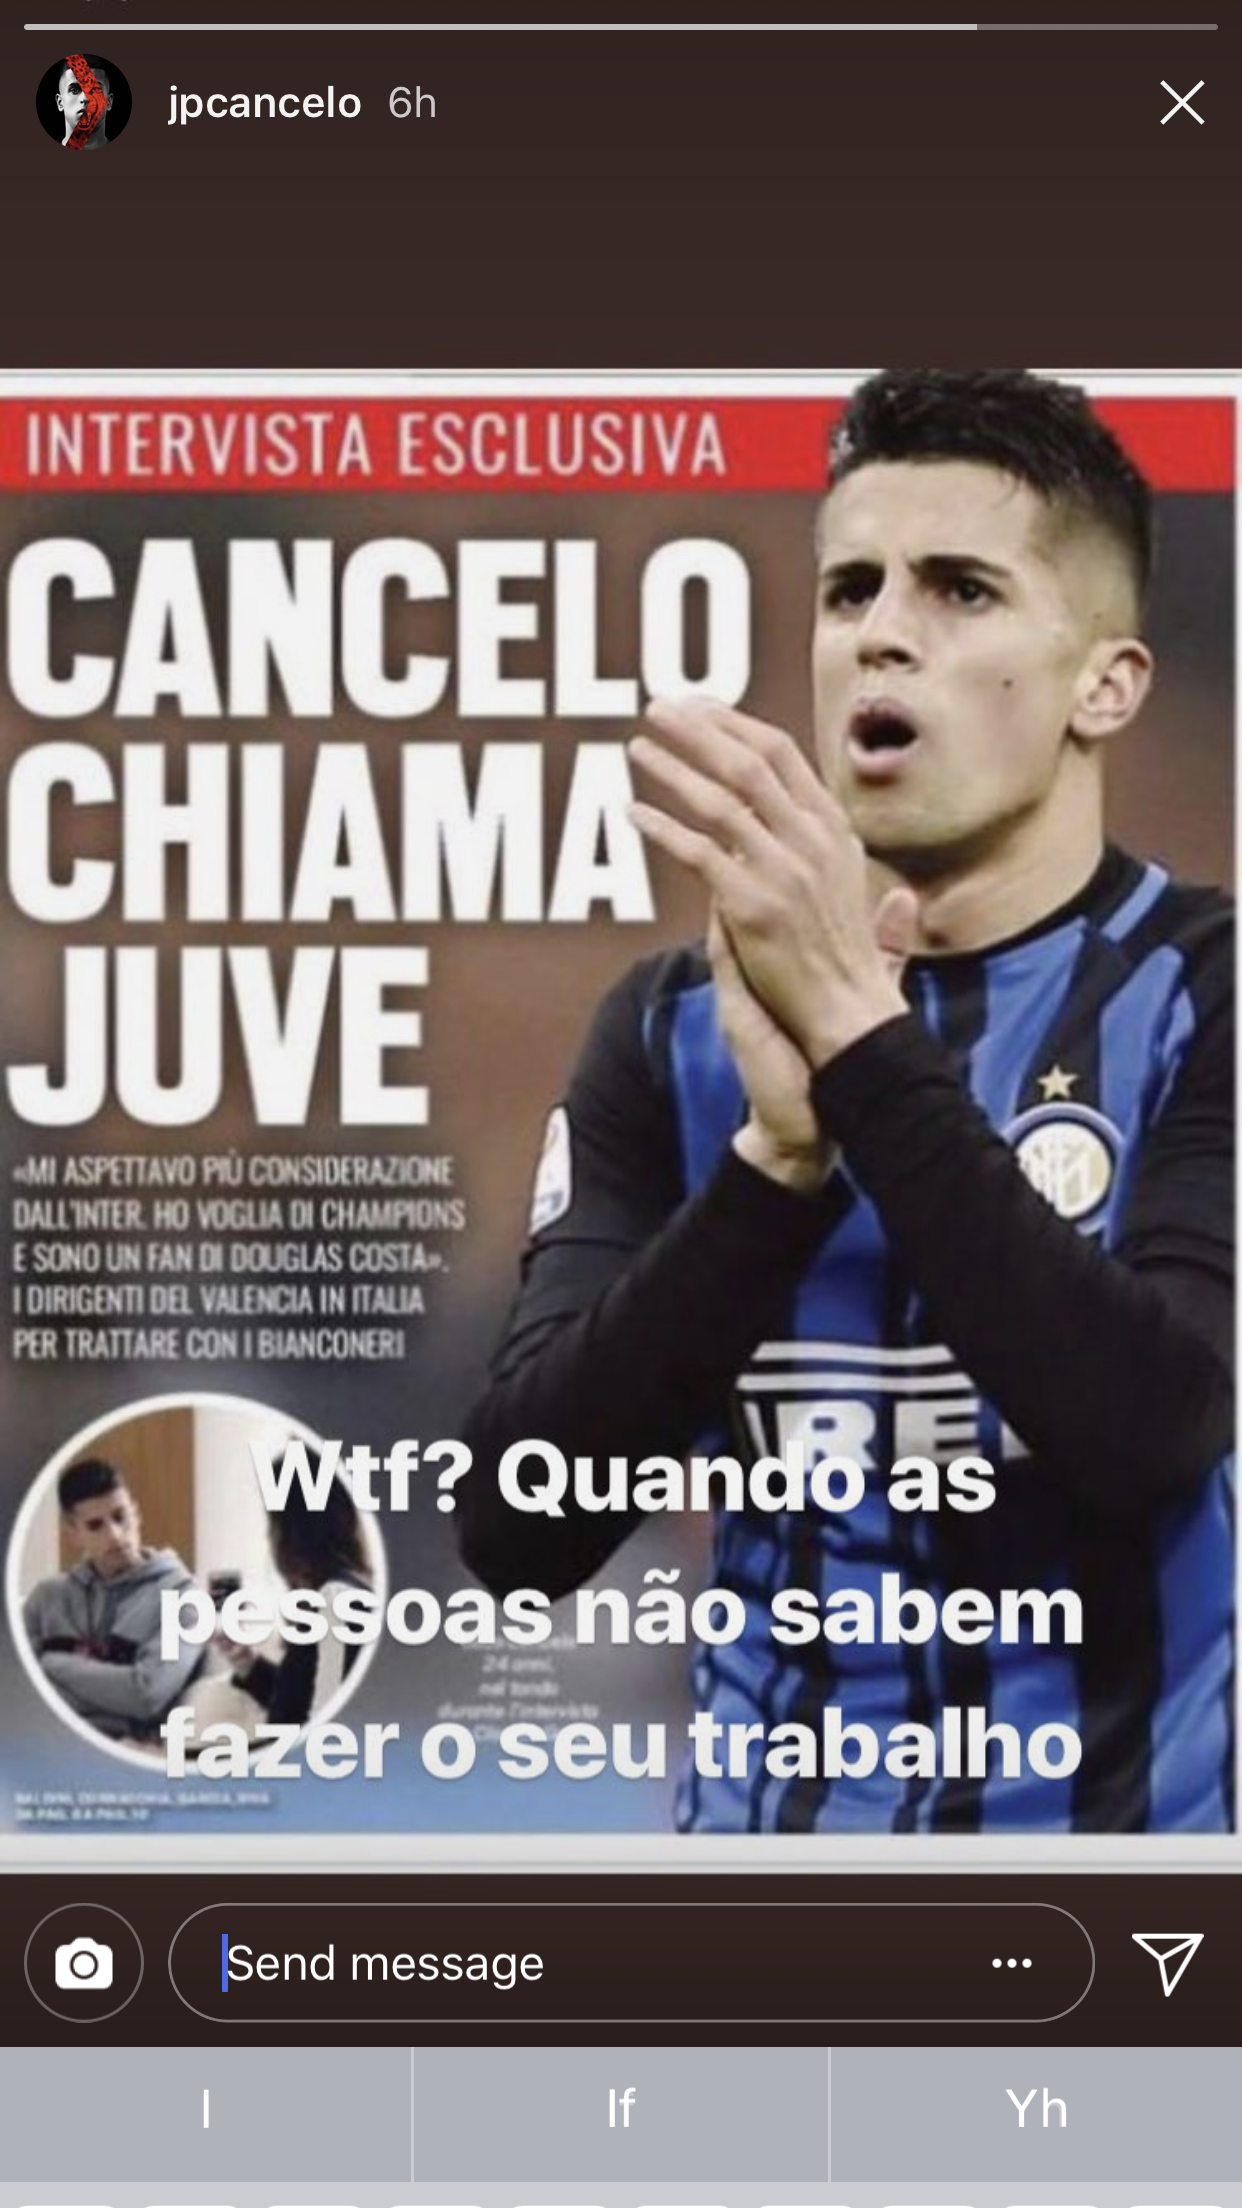 Read Cancelo loves Juventus and then his quote I believe says wtf people need to know how to do there job read into this what you like